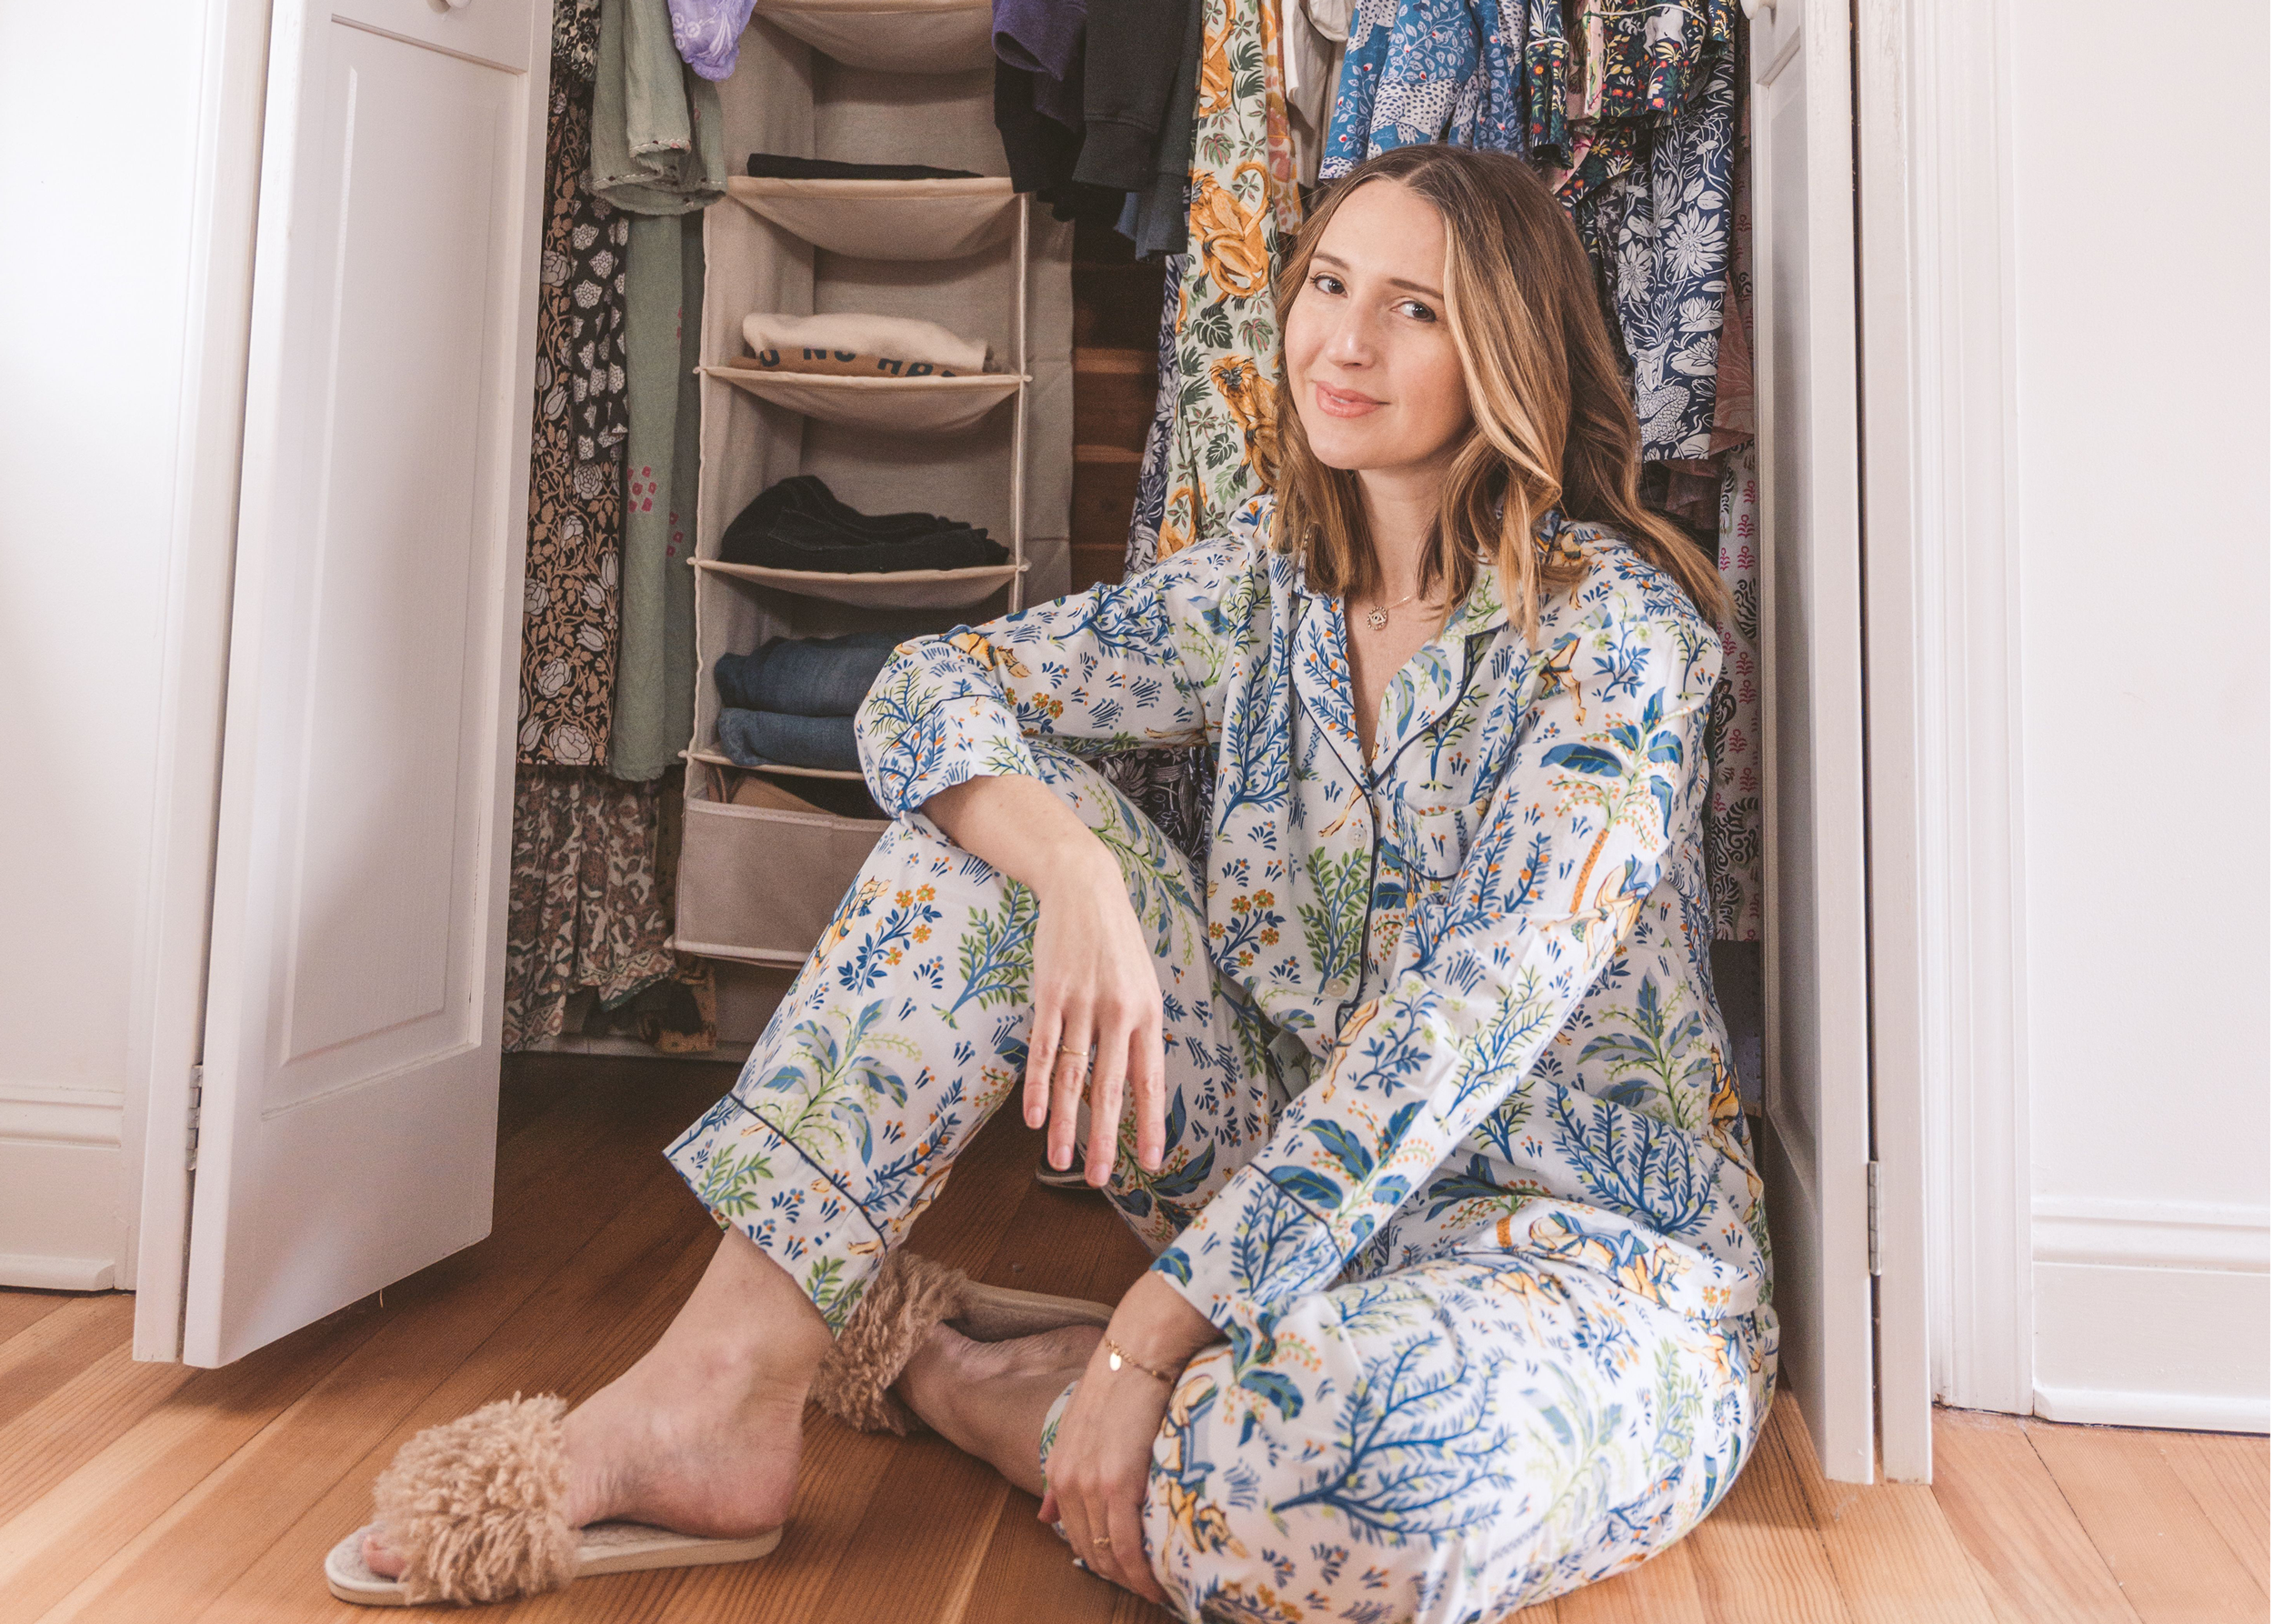 Spring Closet Curation: Selecting Pieces You'll Love Long-Term